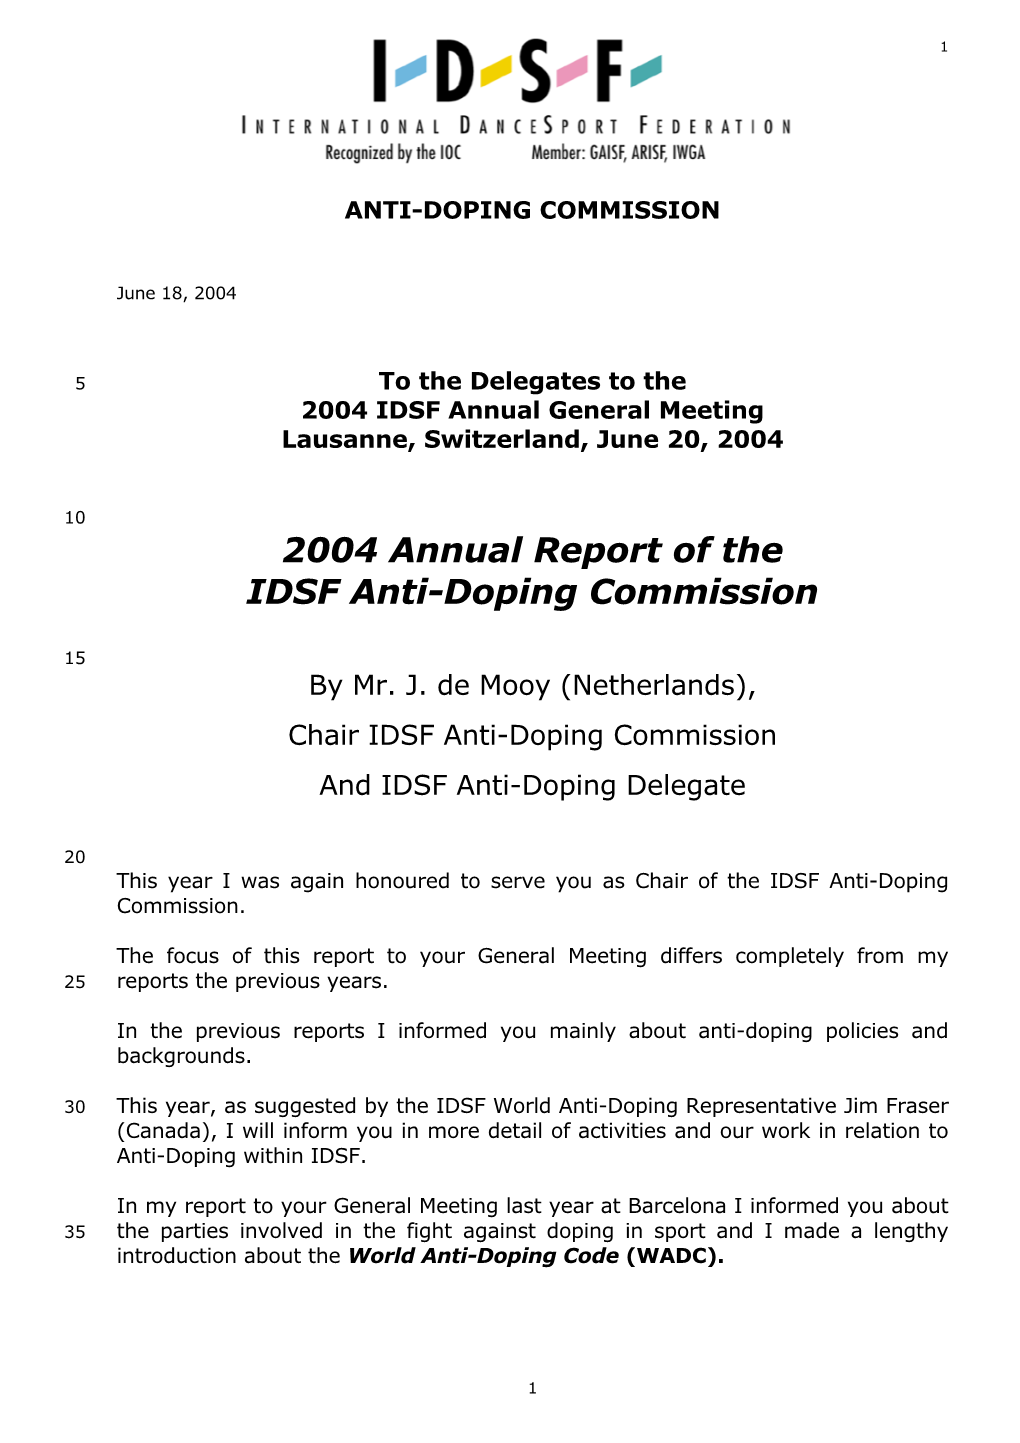 2004 Annual Report of the IDSF Anti-Doping Commission